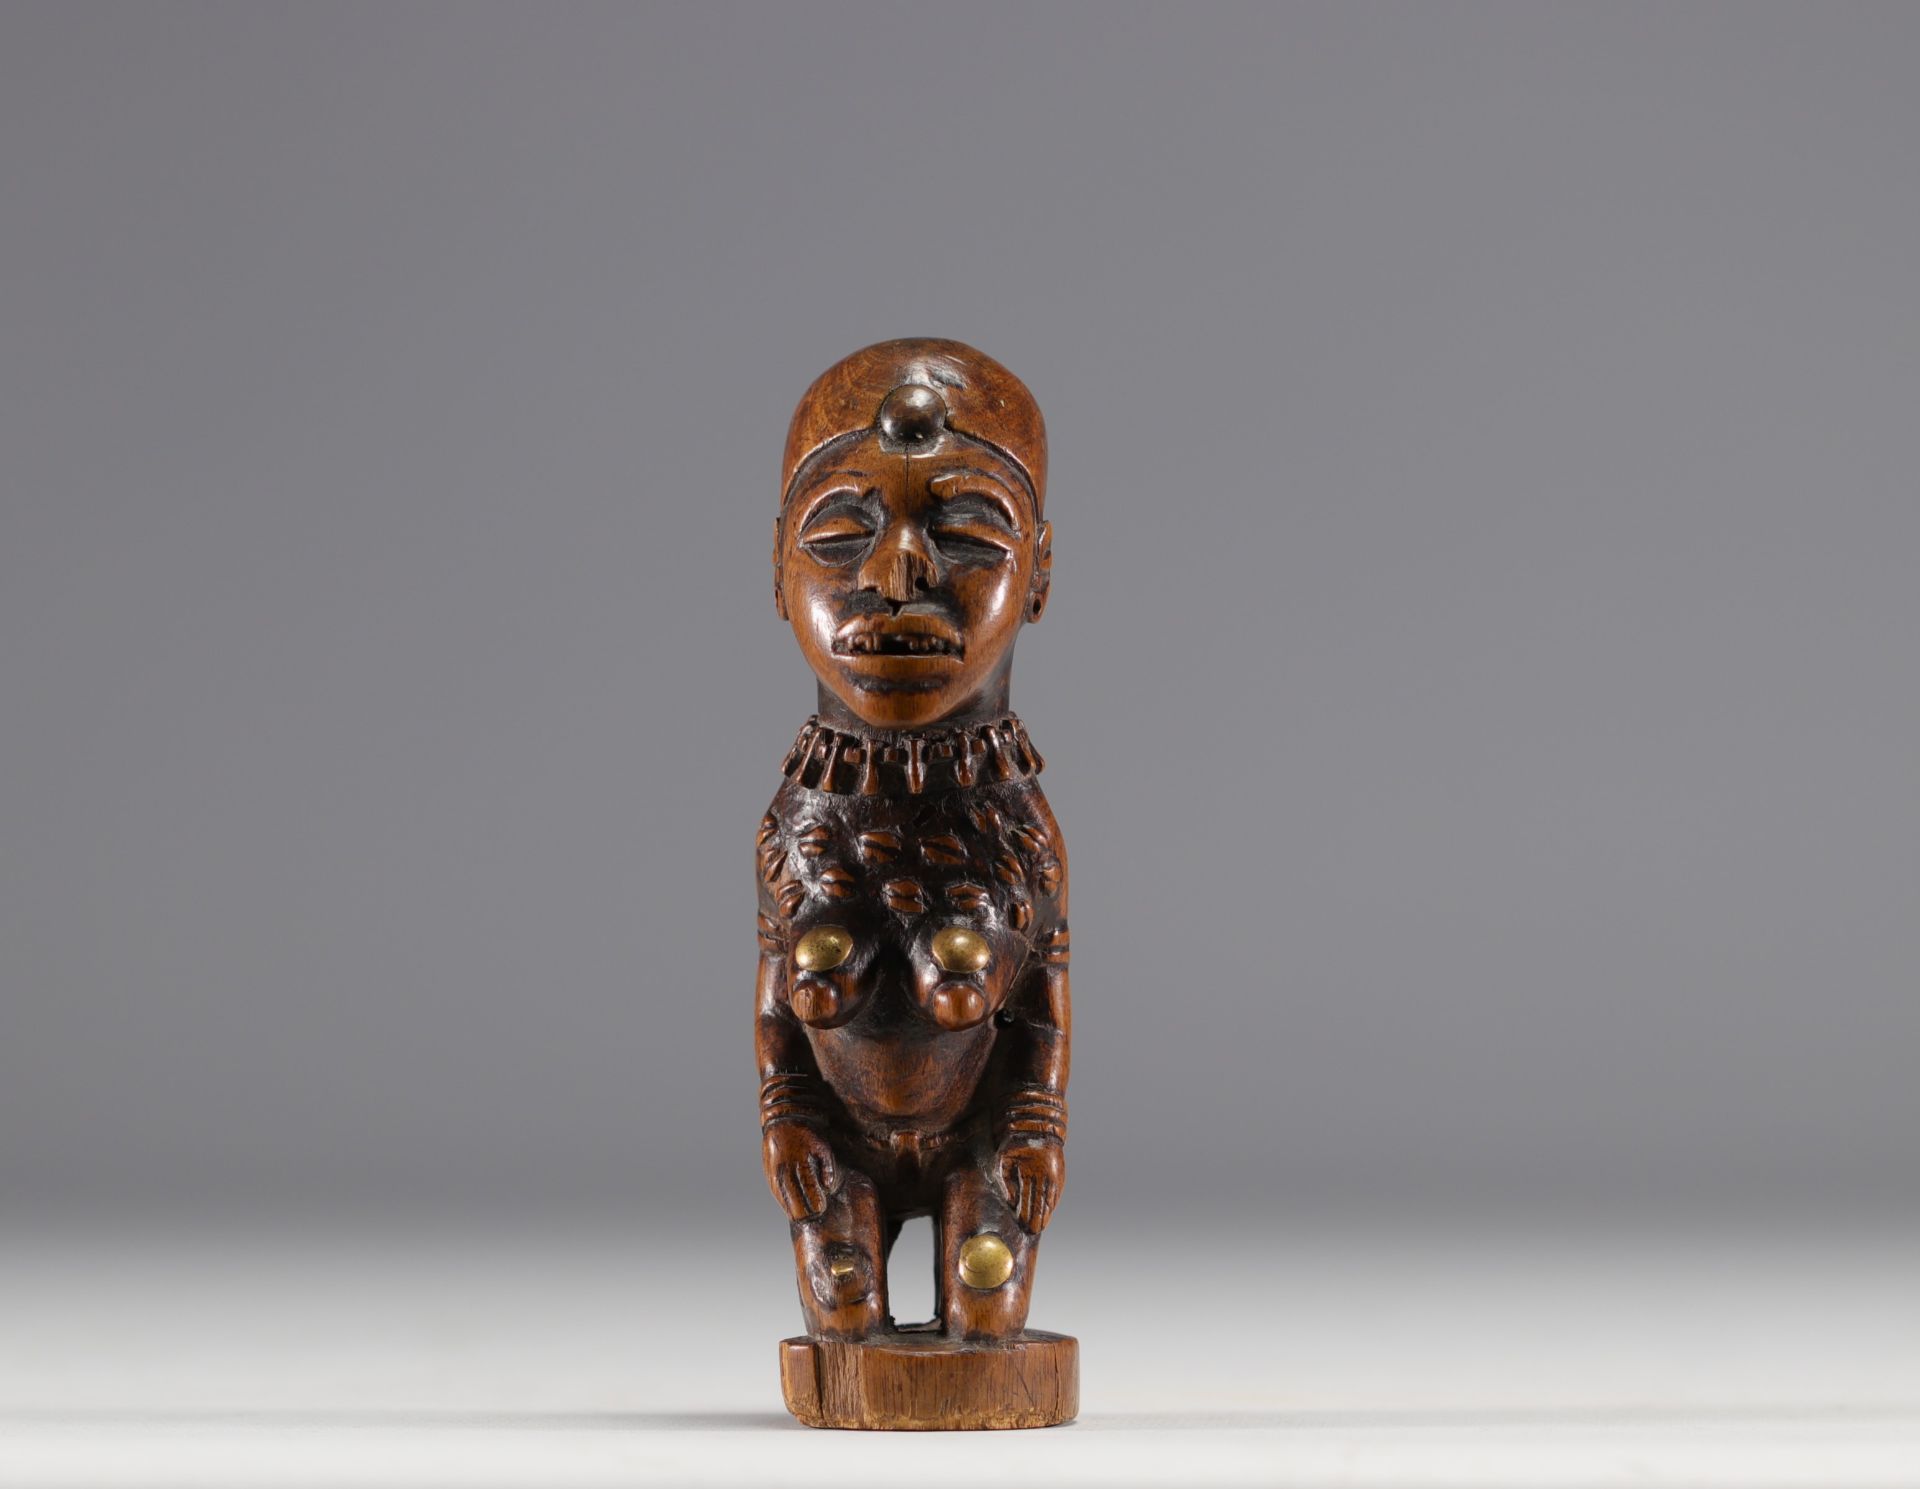 Rare Bas-Congo statuette in carved wood with scarification marks and nails from the 1900s - Image 4 of 6